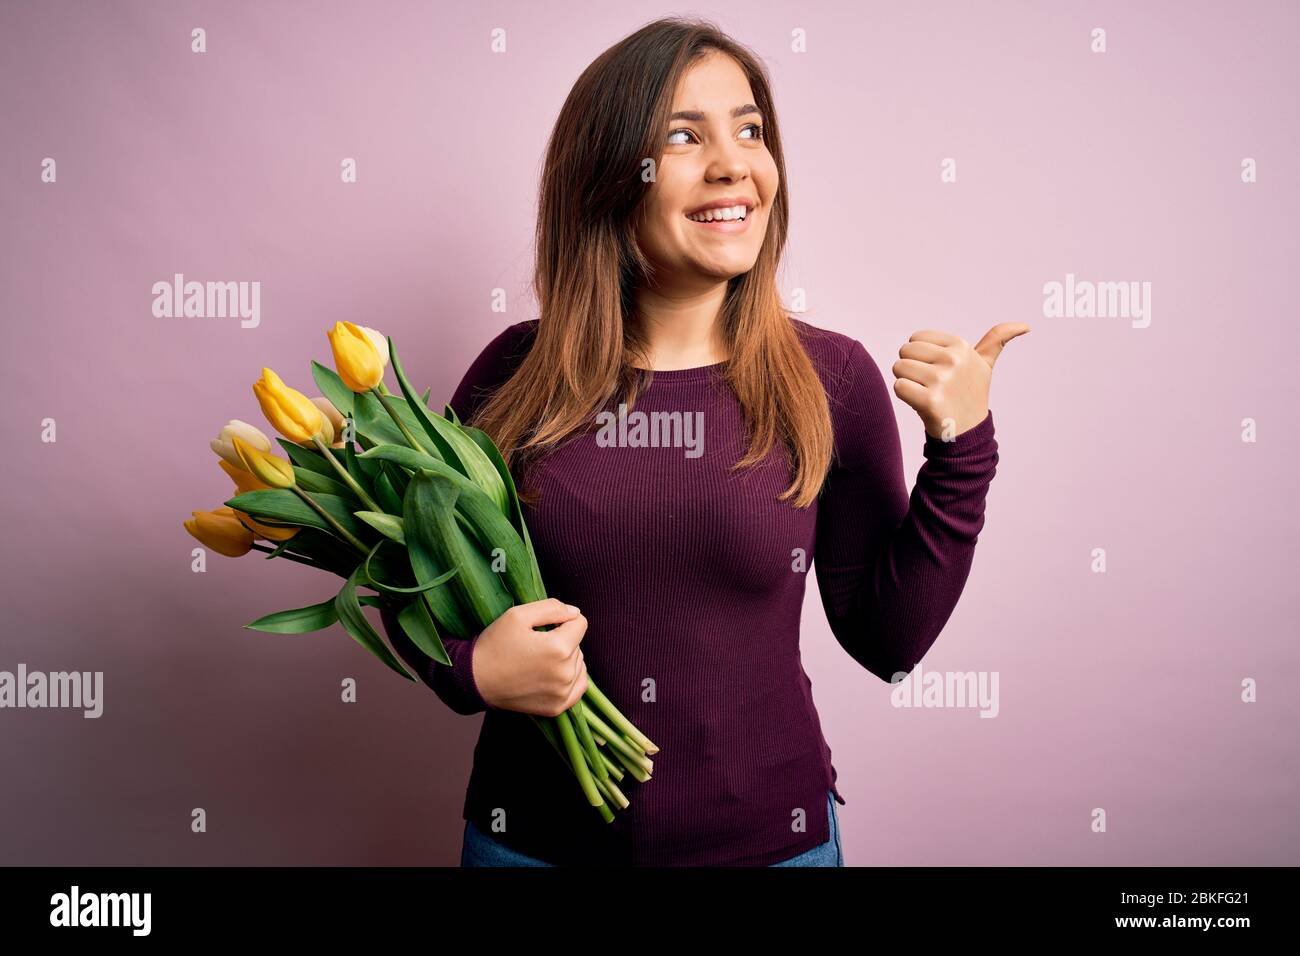 Young blonde woman holding romantic bouquet of yellow tulips flowers over pink background smiling with happy face looking and pointing to the side wit Stock Photo